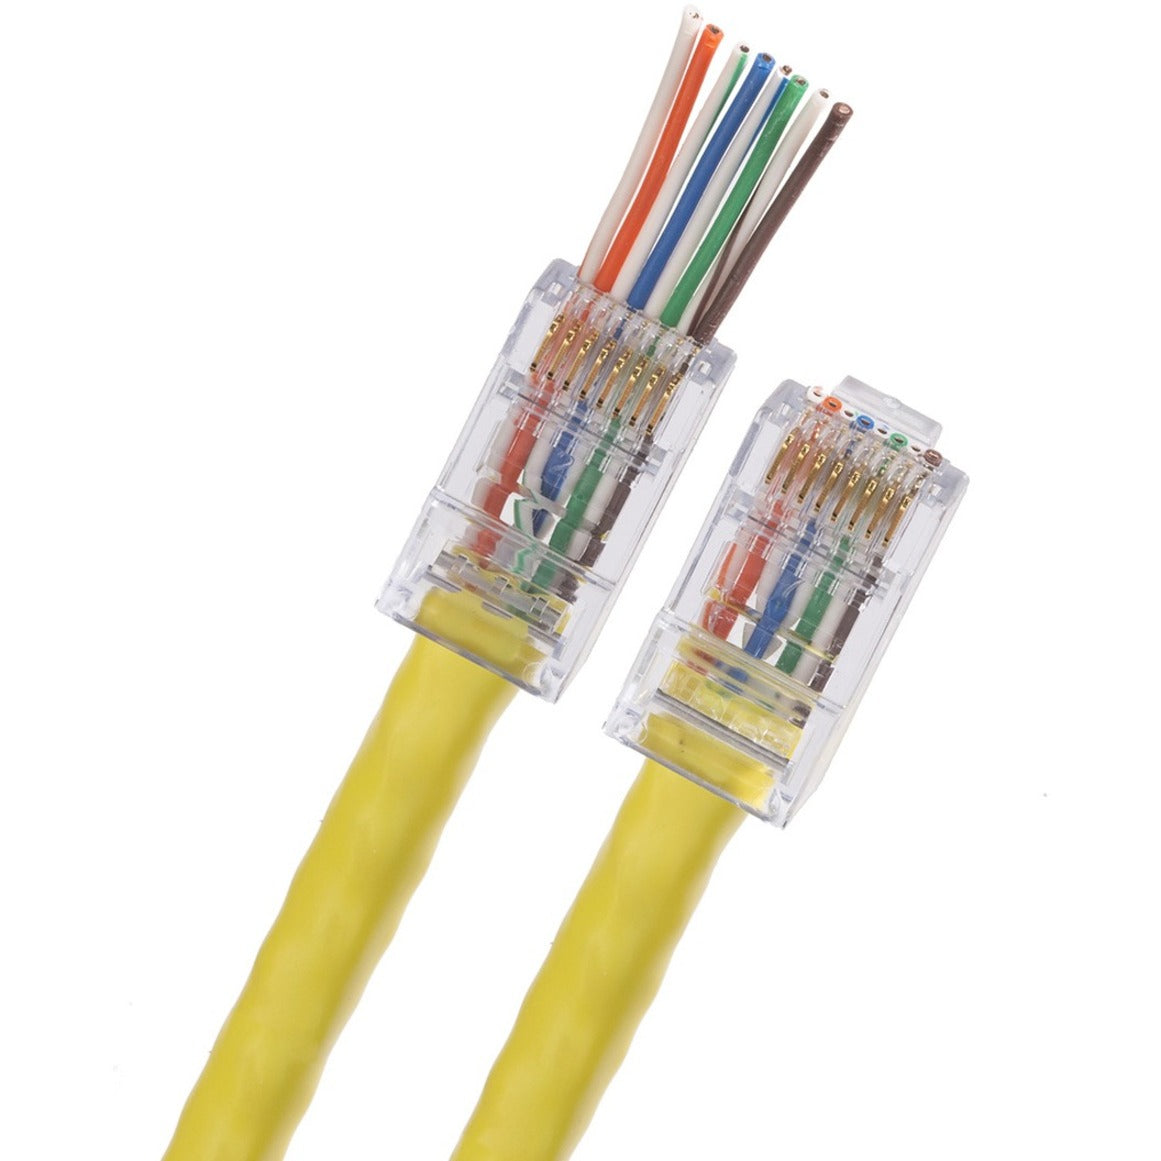 Triplett CAT6-HSP High Speed Pass-Thru Modular CAT6 Connector, Network Connector for Fast and Easy Ethernet Connections